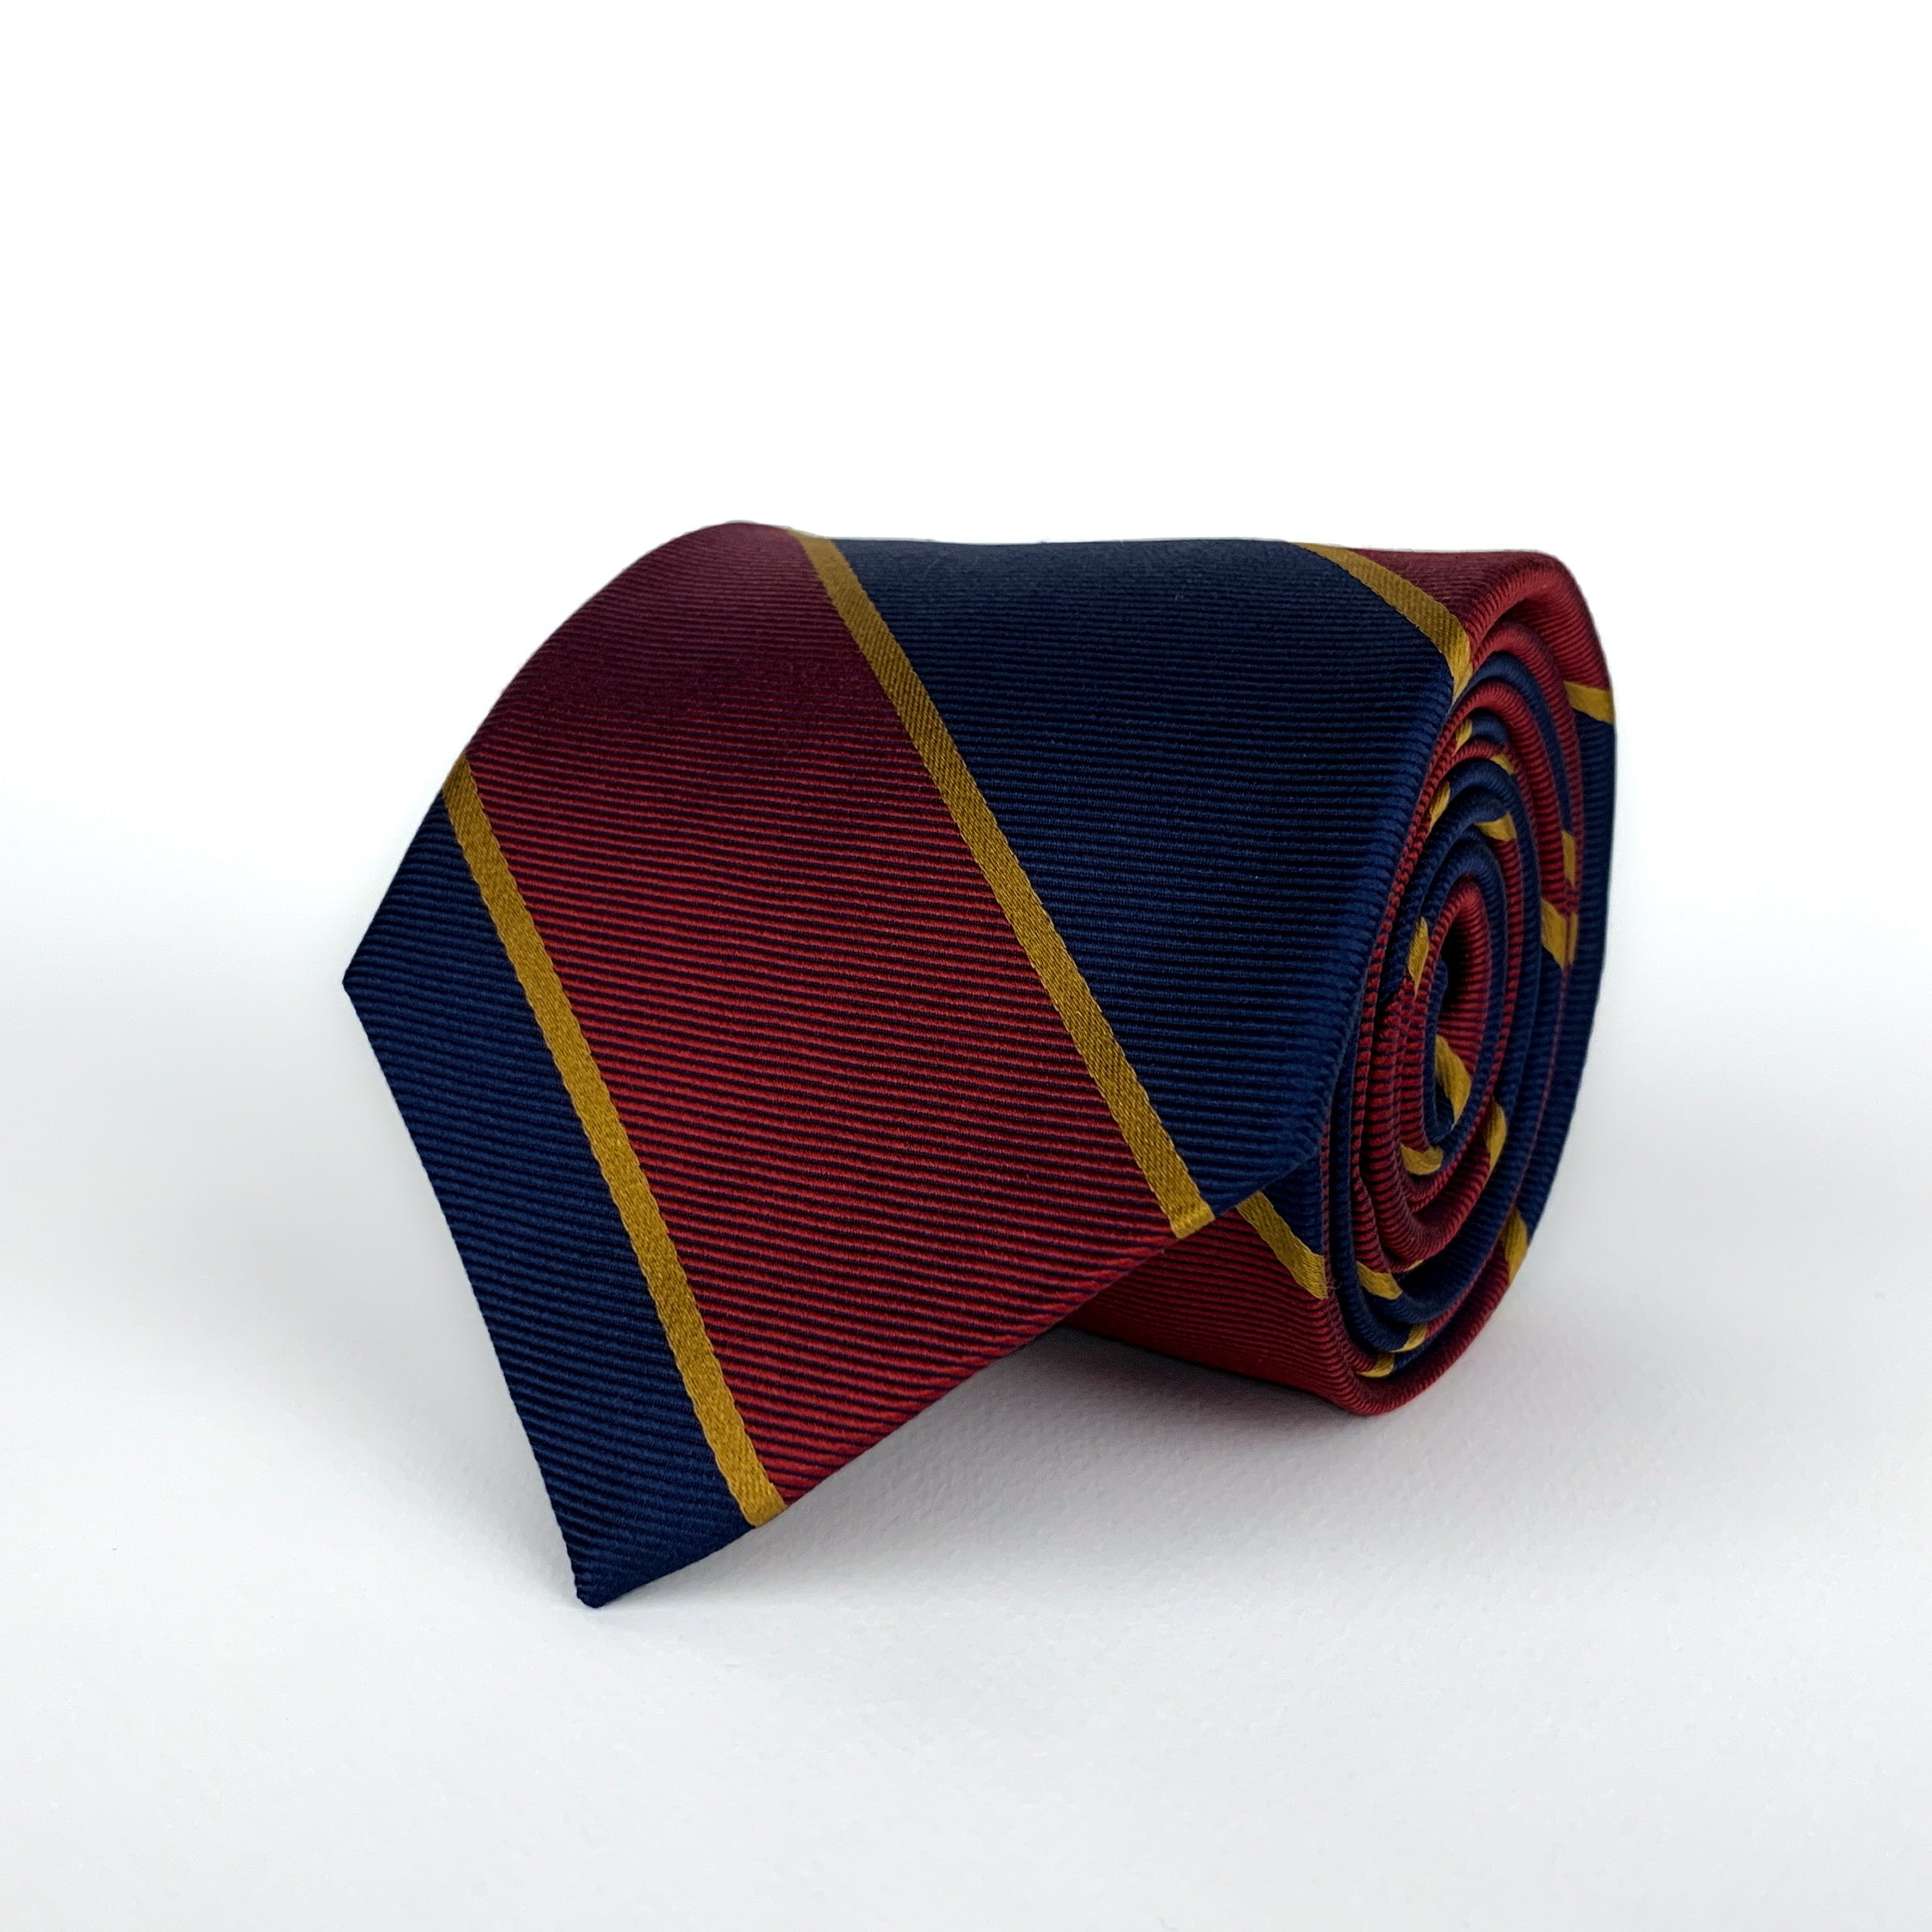 Mulberry silk twill regimental tie with navy blue and red diagonal stripes with woven gold detailing rolled and placed on a white background